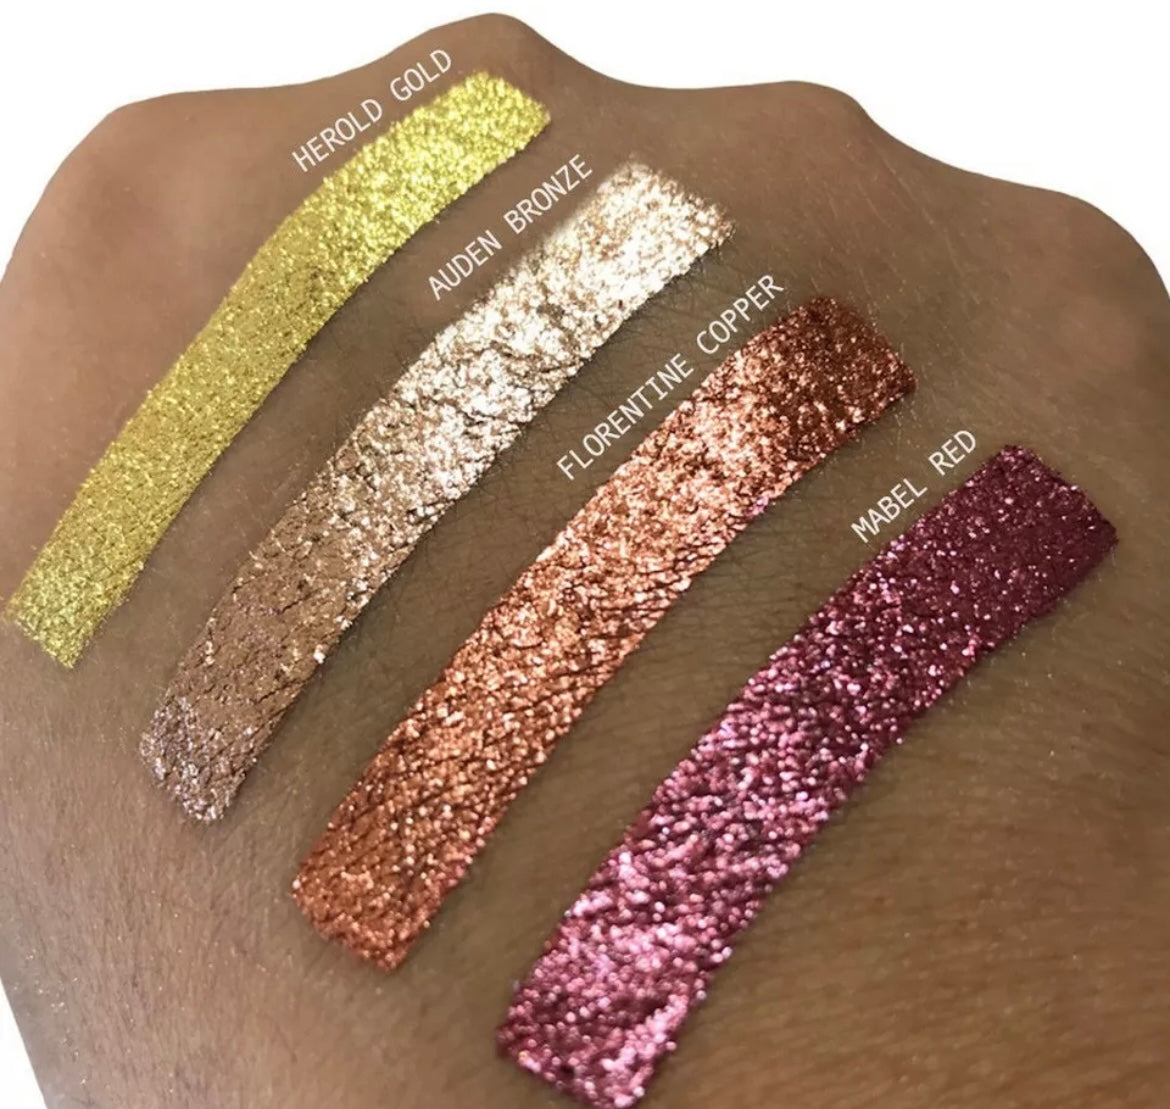 Luxury Glitter Loose Pigment Powders -Various Shades